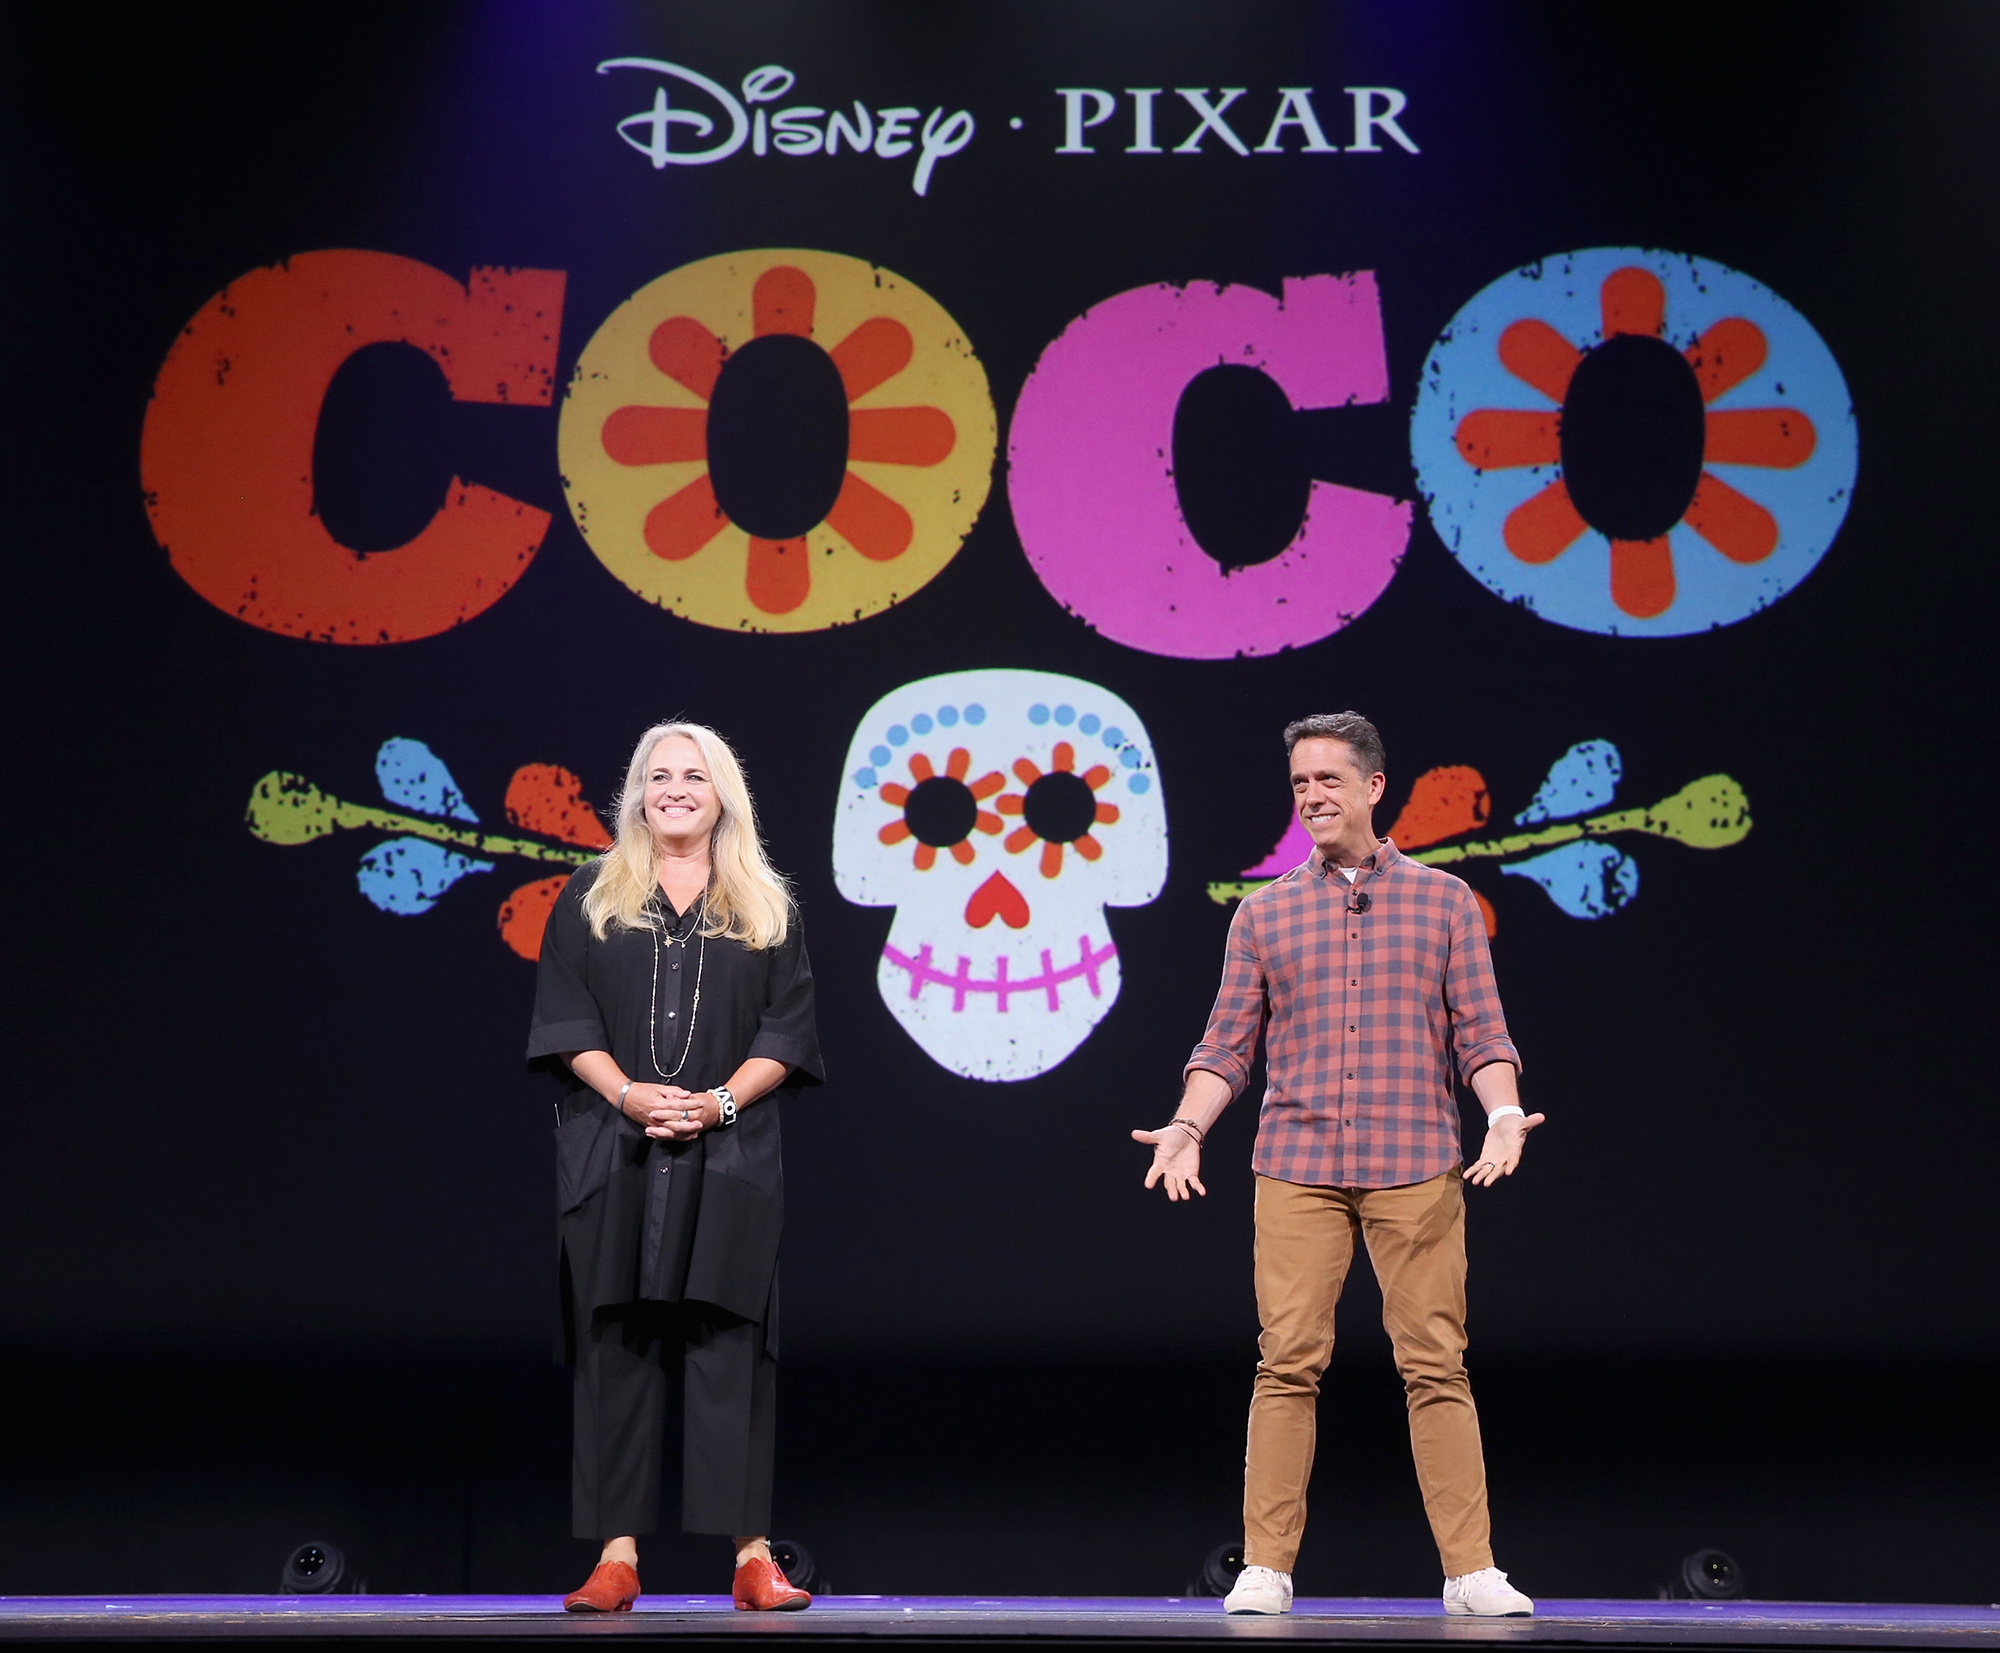 Producer Darla K. Anderson (L) and director Lee Unkrich of COCO took part today in "Pixar and Walt Disney Animation Studios: The Upcoming Films" presentation at Disney's D23 EXPO 2015 in Anaheim, Calif.  (Photo by Jesse Grant/Getty Images for Disney) (Jesse Grant&mdash;Getty Images for Disney)